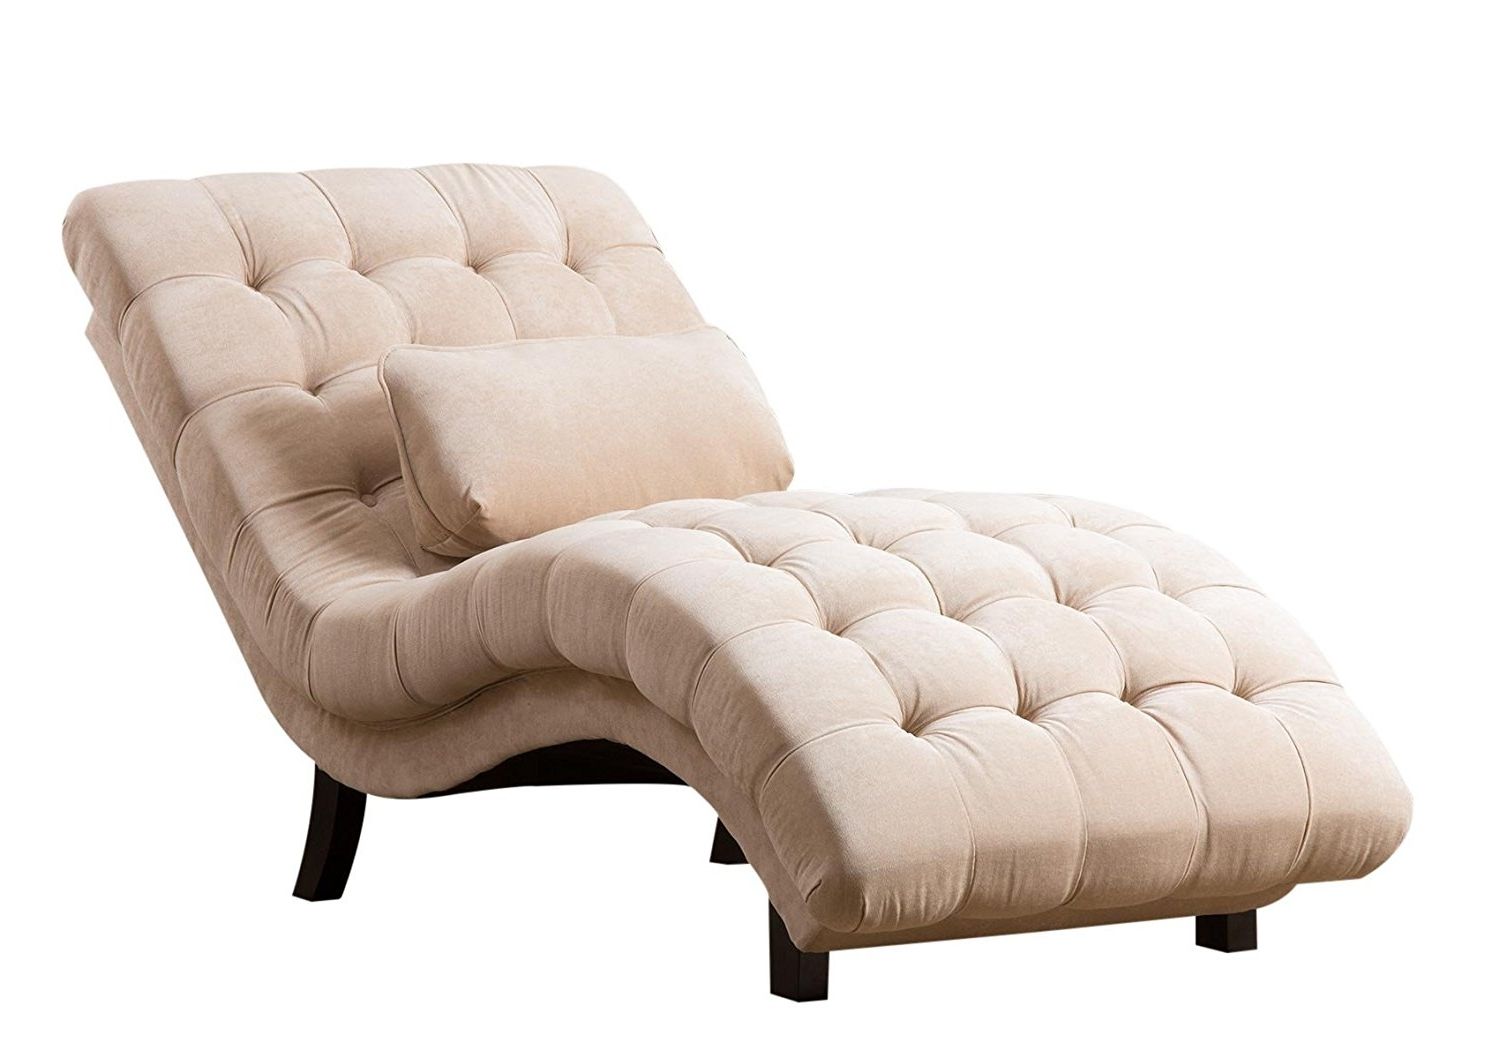 Upholstered Chaise Lounge Chairs Pertaining To Latest Amazon: Abbyson Carmen Cream Fabric Chaise: Home & Kitchen (View 6 of 15)